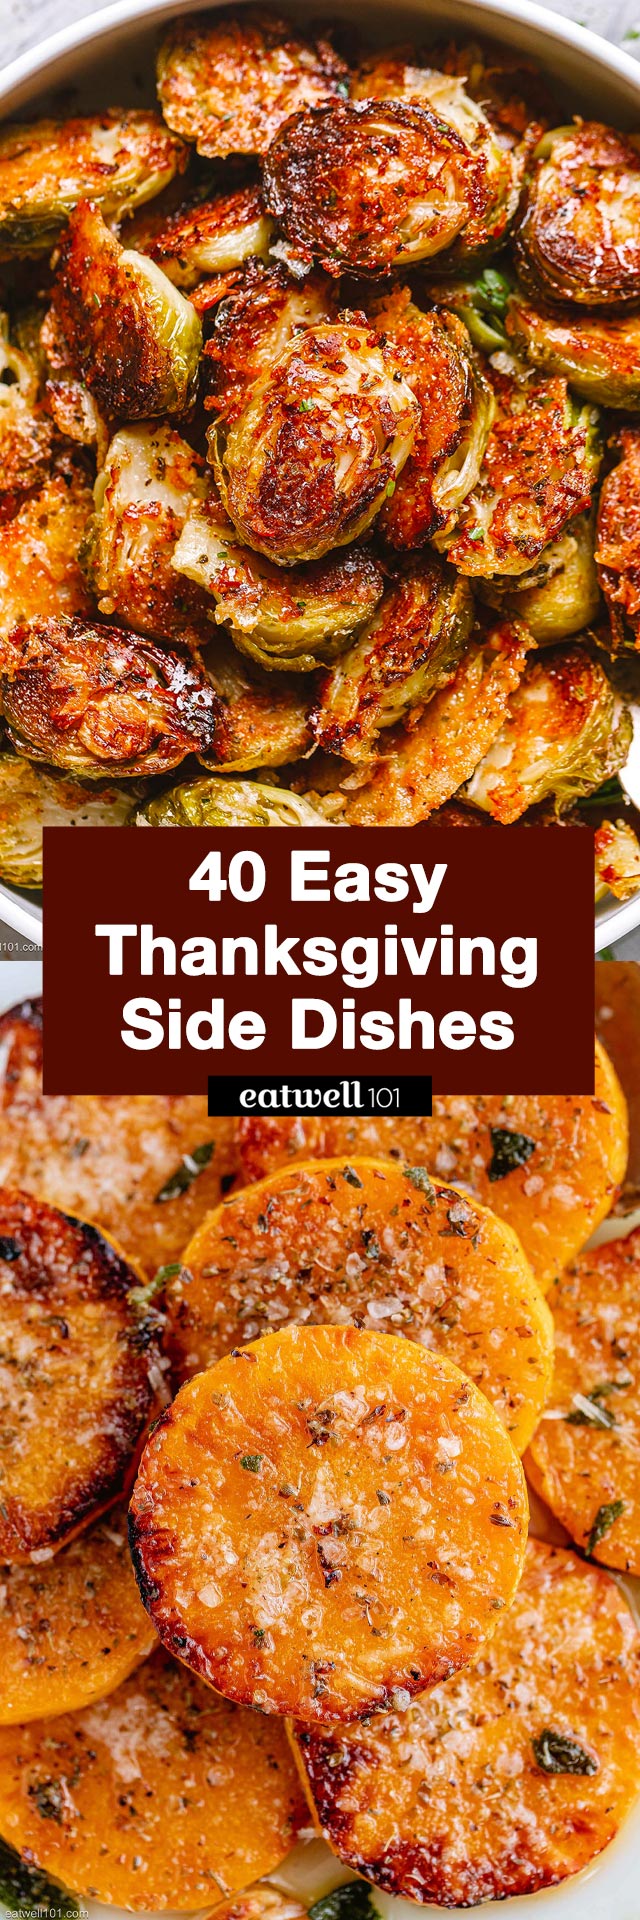 Thanksgiving Side Dishes - #thanksgiving #sidedishes #recipes #eatwell101 - These sides dish recipes for Thanksgiving are easy,  impressive, and 100% fool-proof!